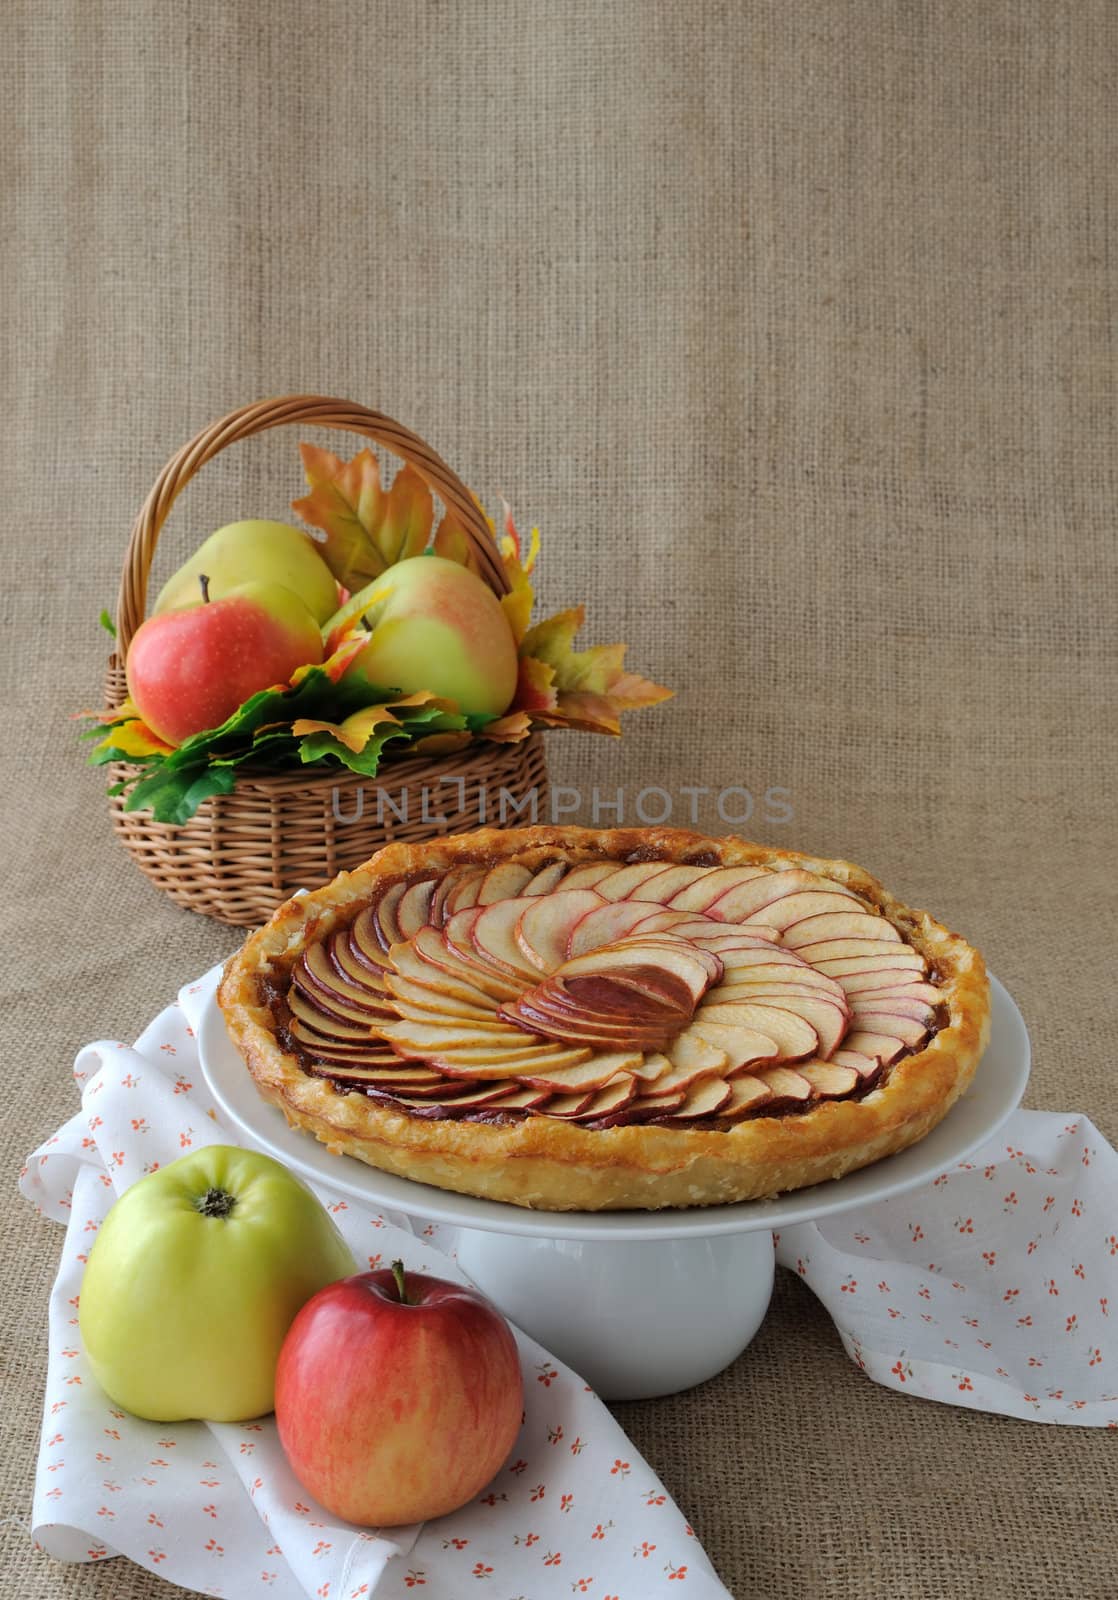 Cake with apples by Apolonia